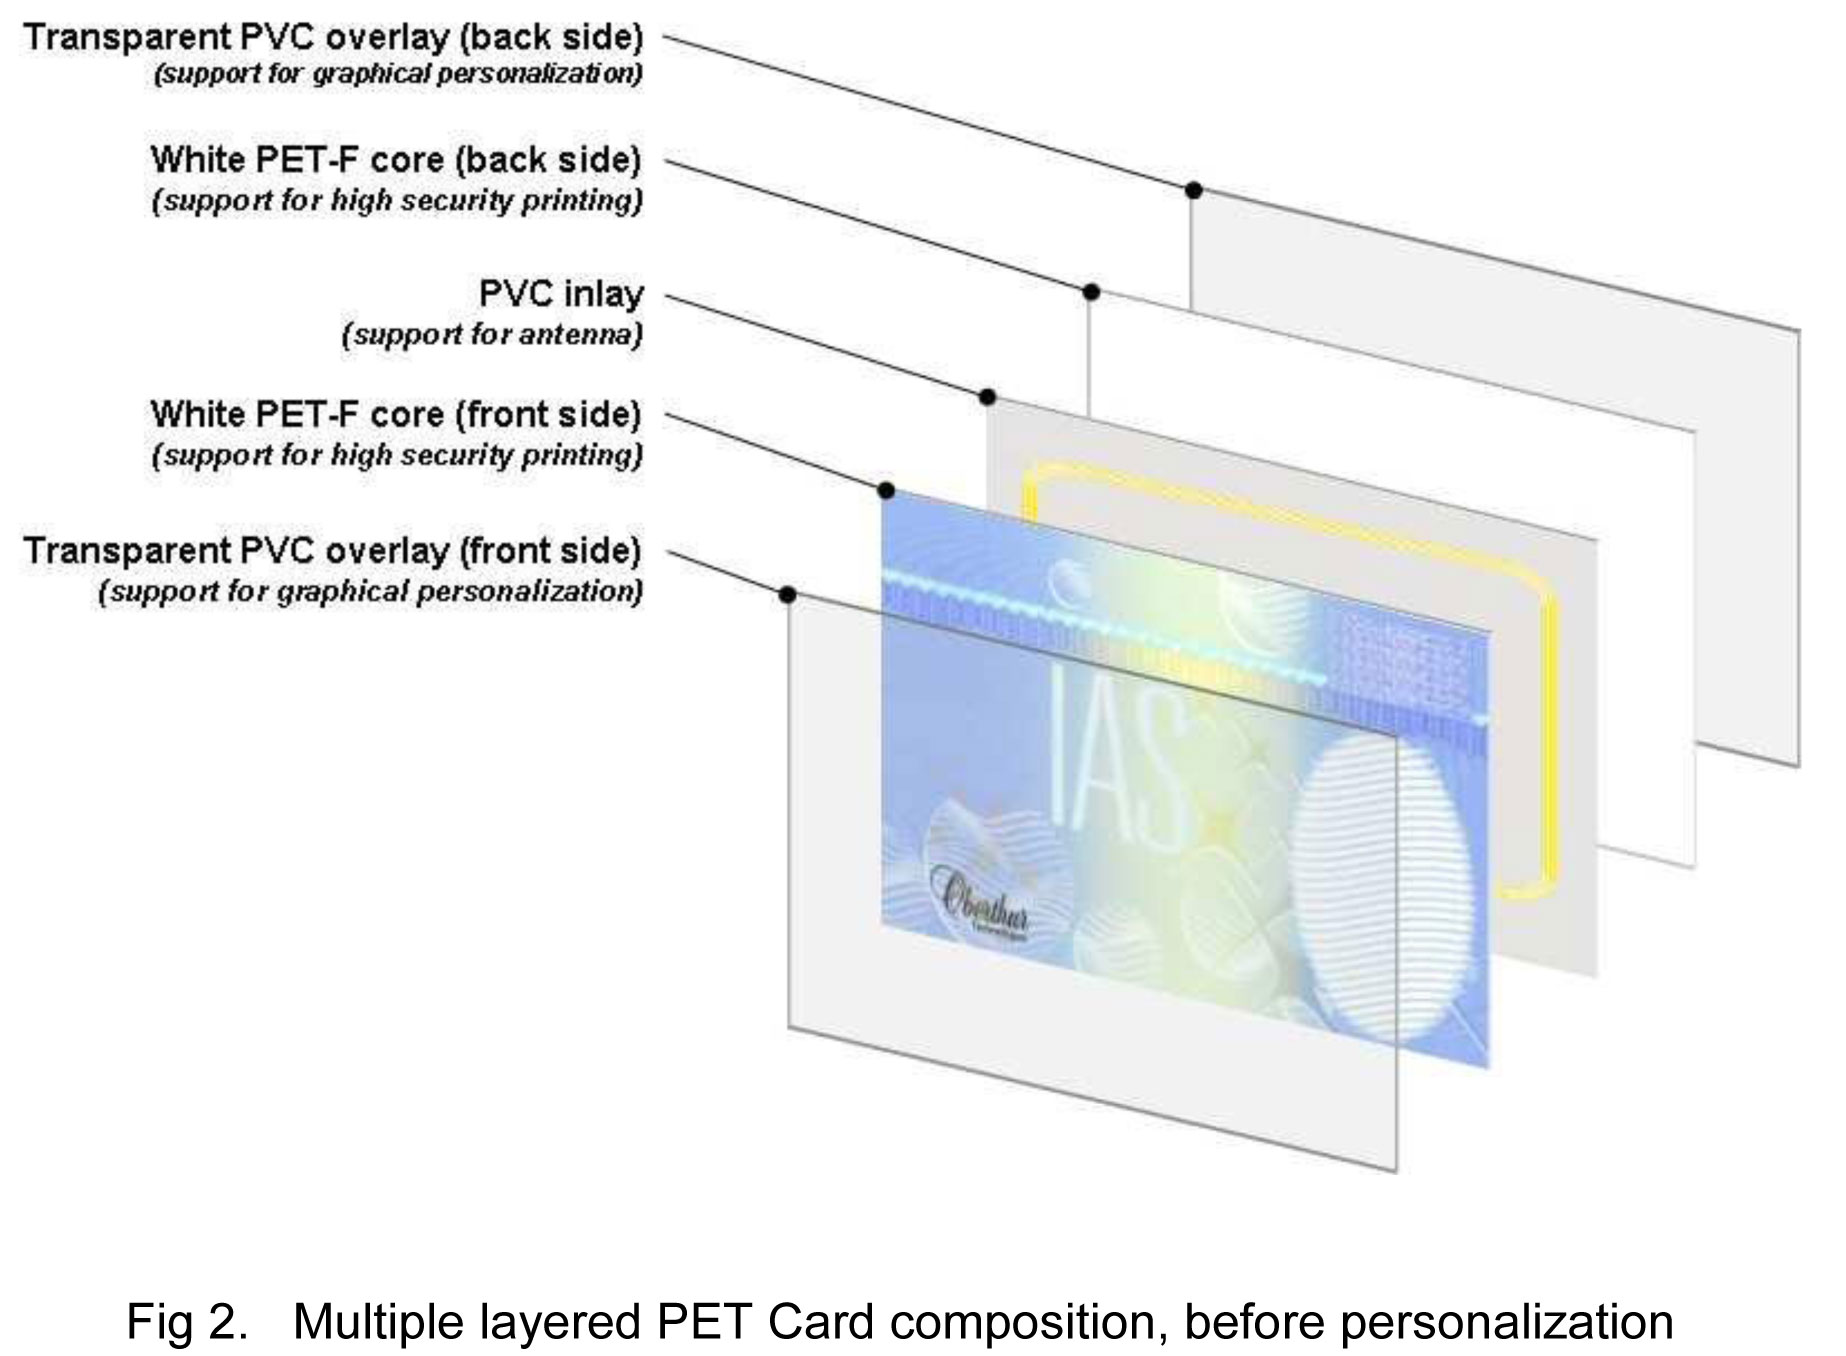 Multiple layered PET Card composition, before personalization